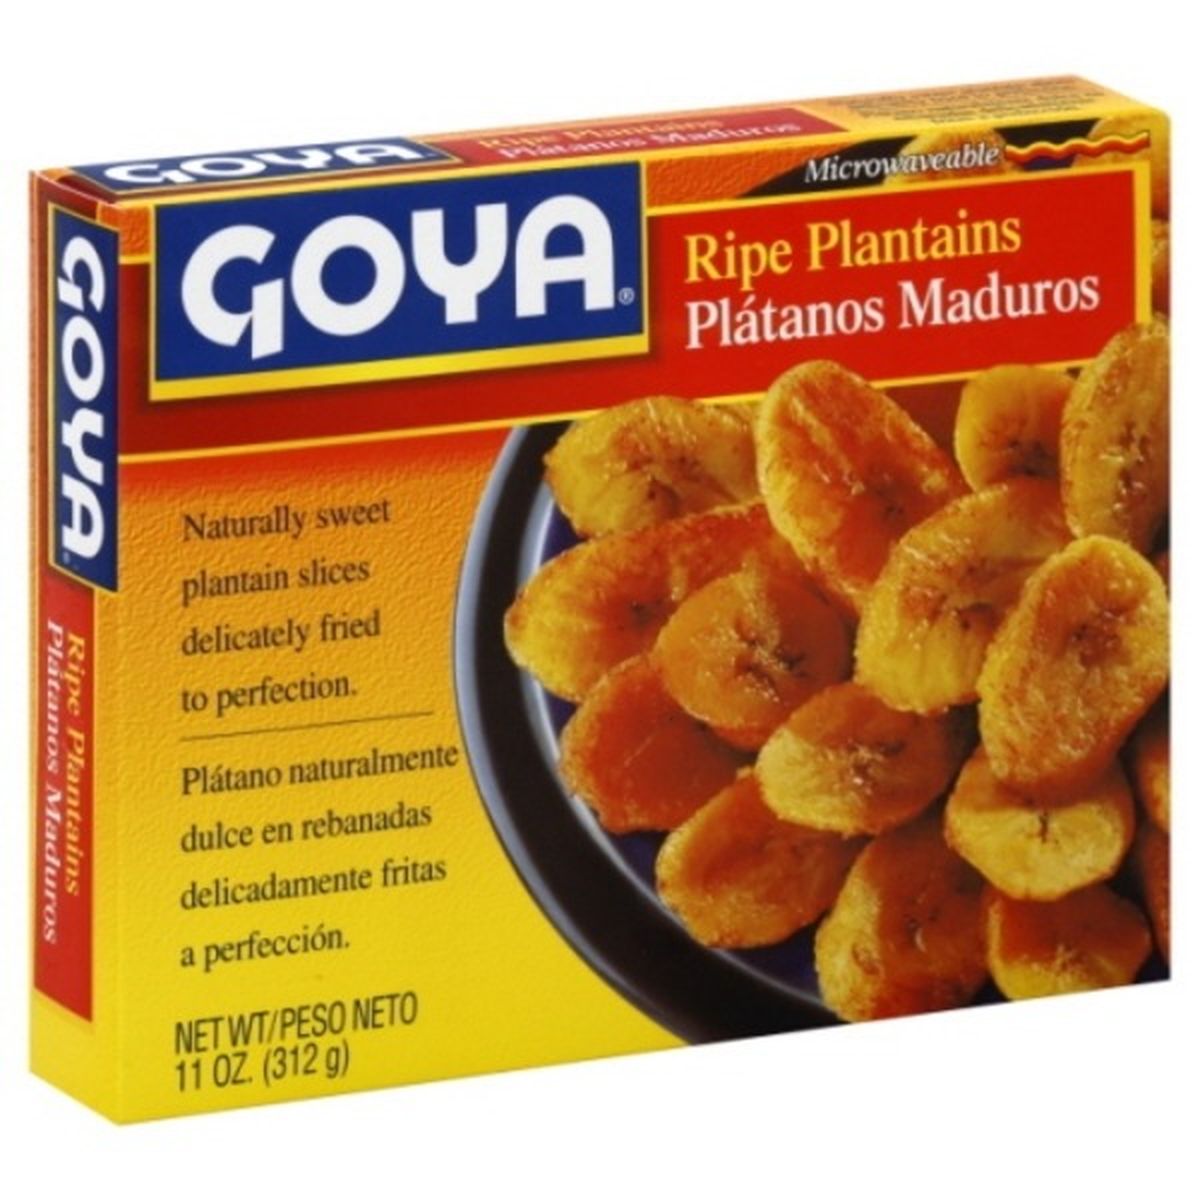 Calories in Goya Ripe Plantains